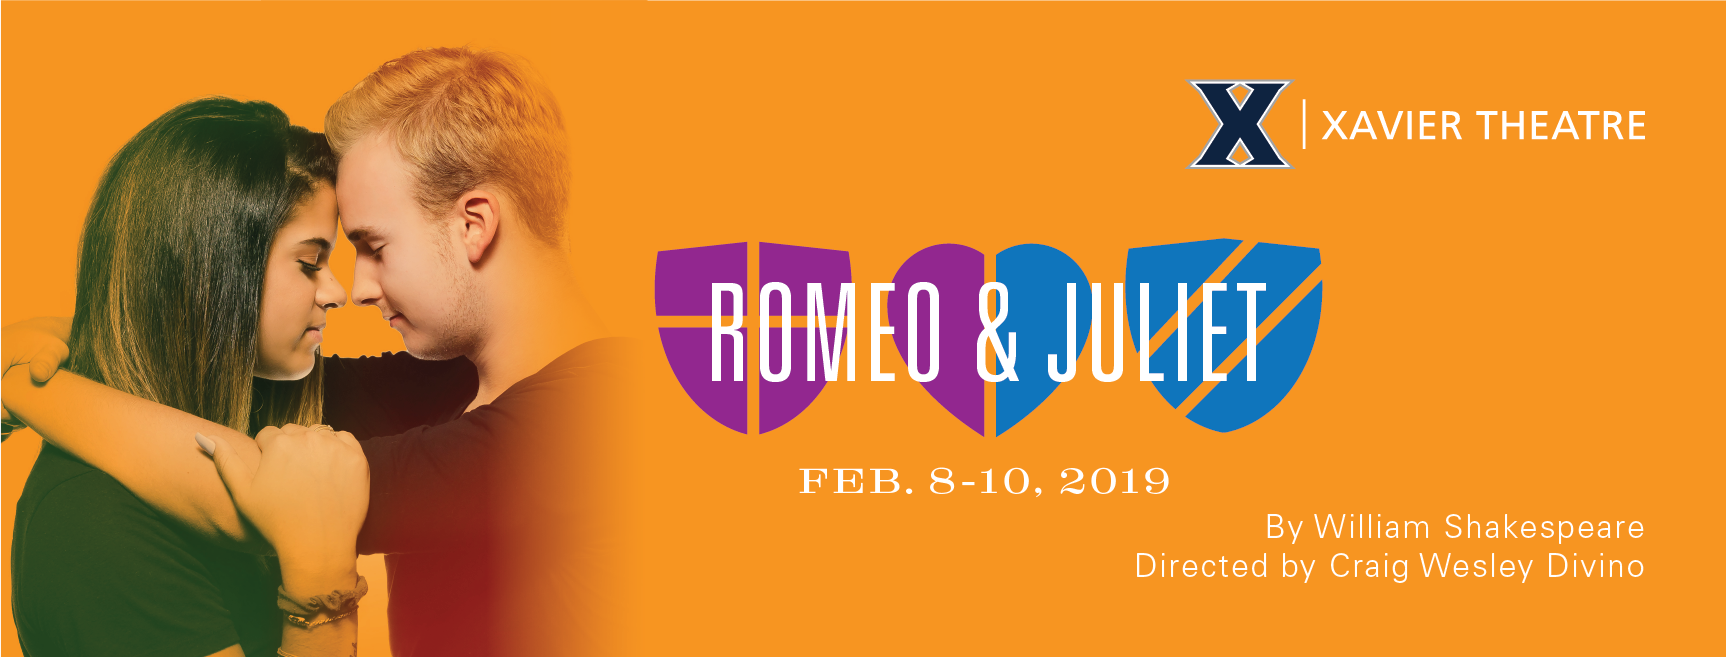 Poster for Romeo & Juliet with two people embracing